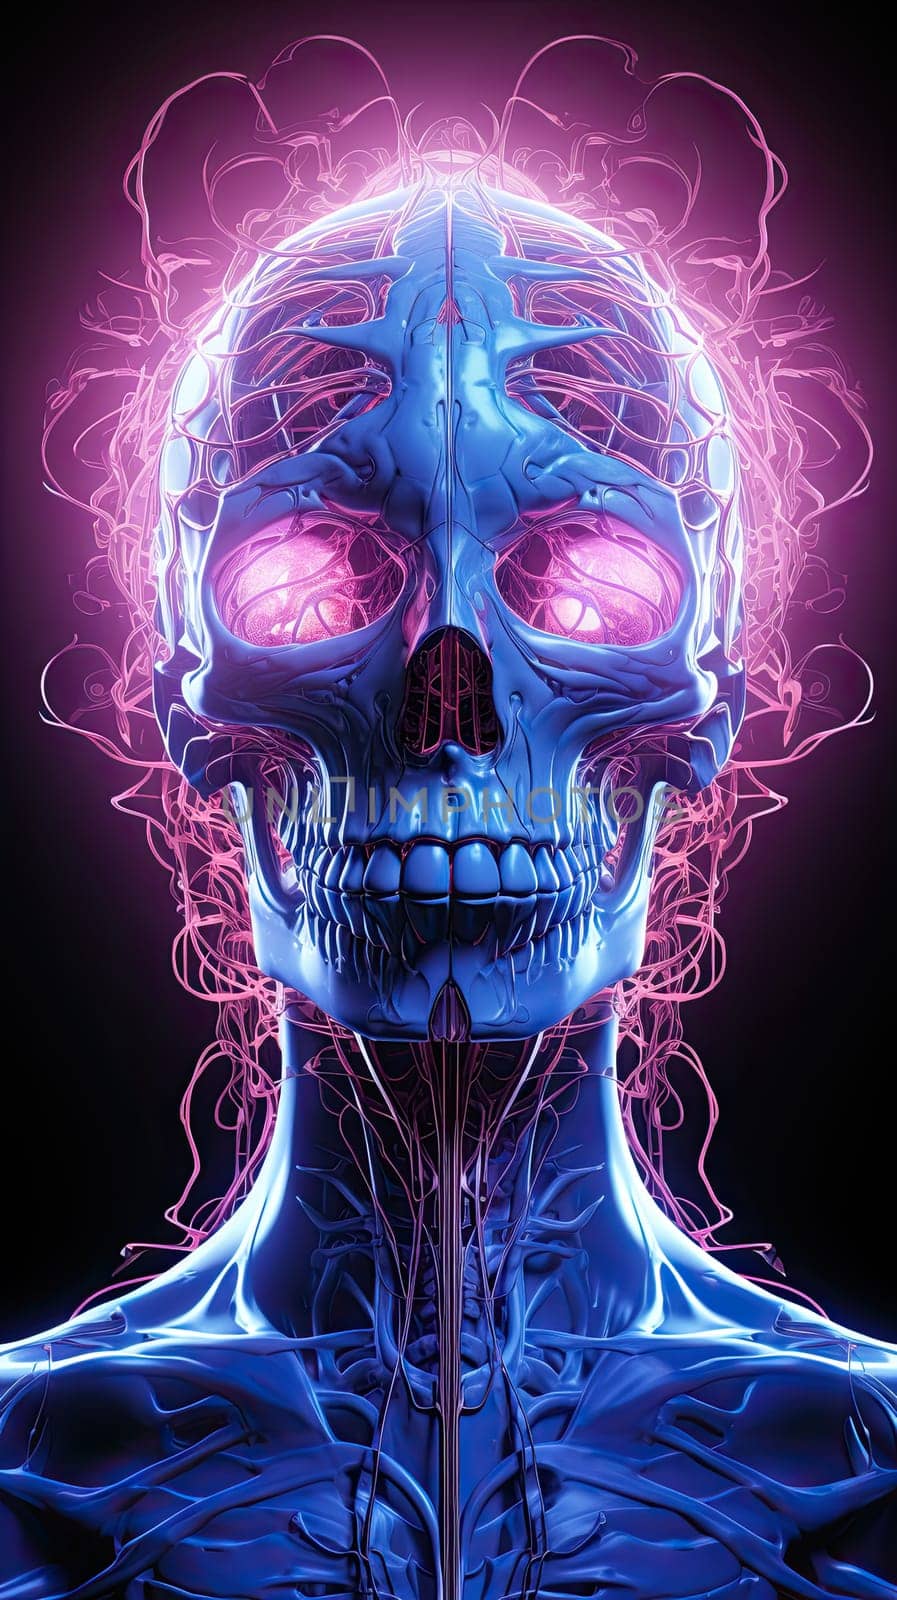 Abstract portrait of skull brain and consciousness digital art.